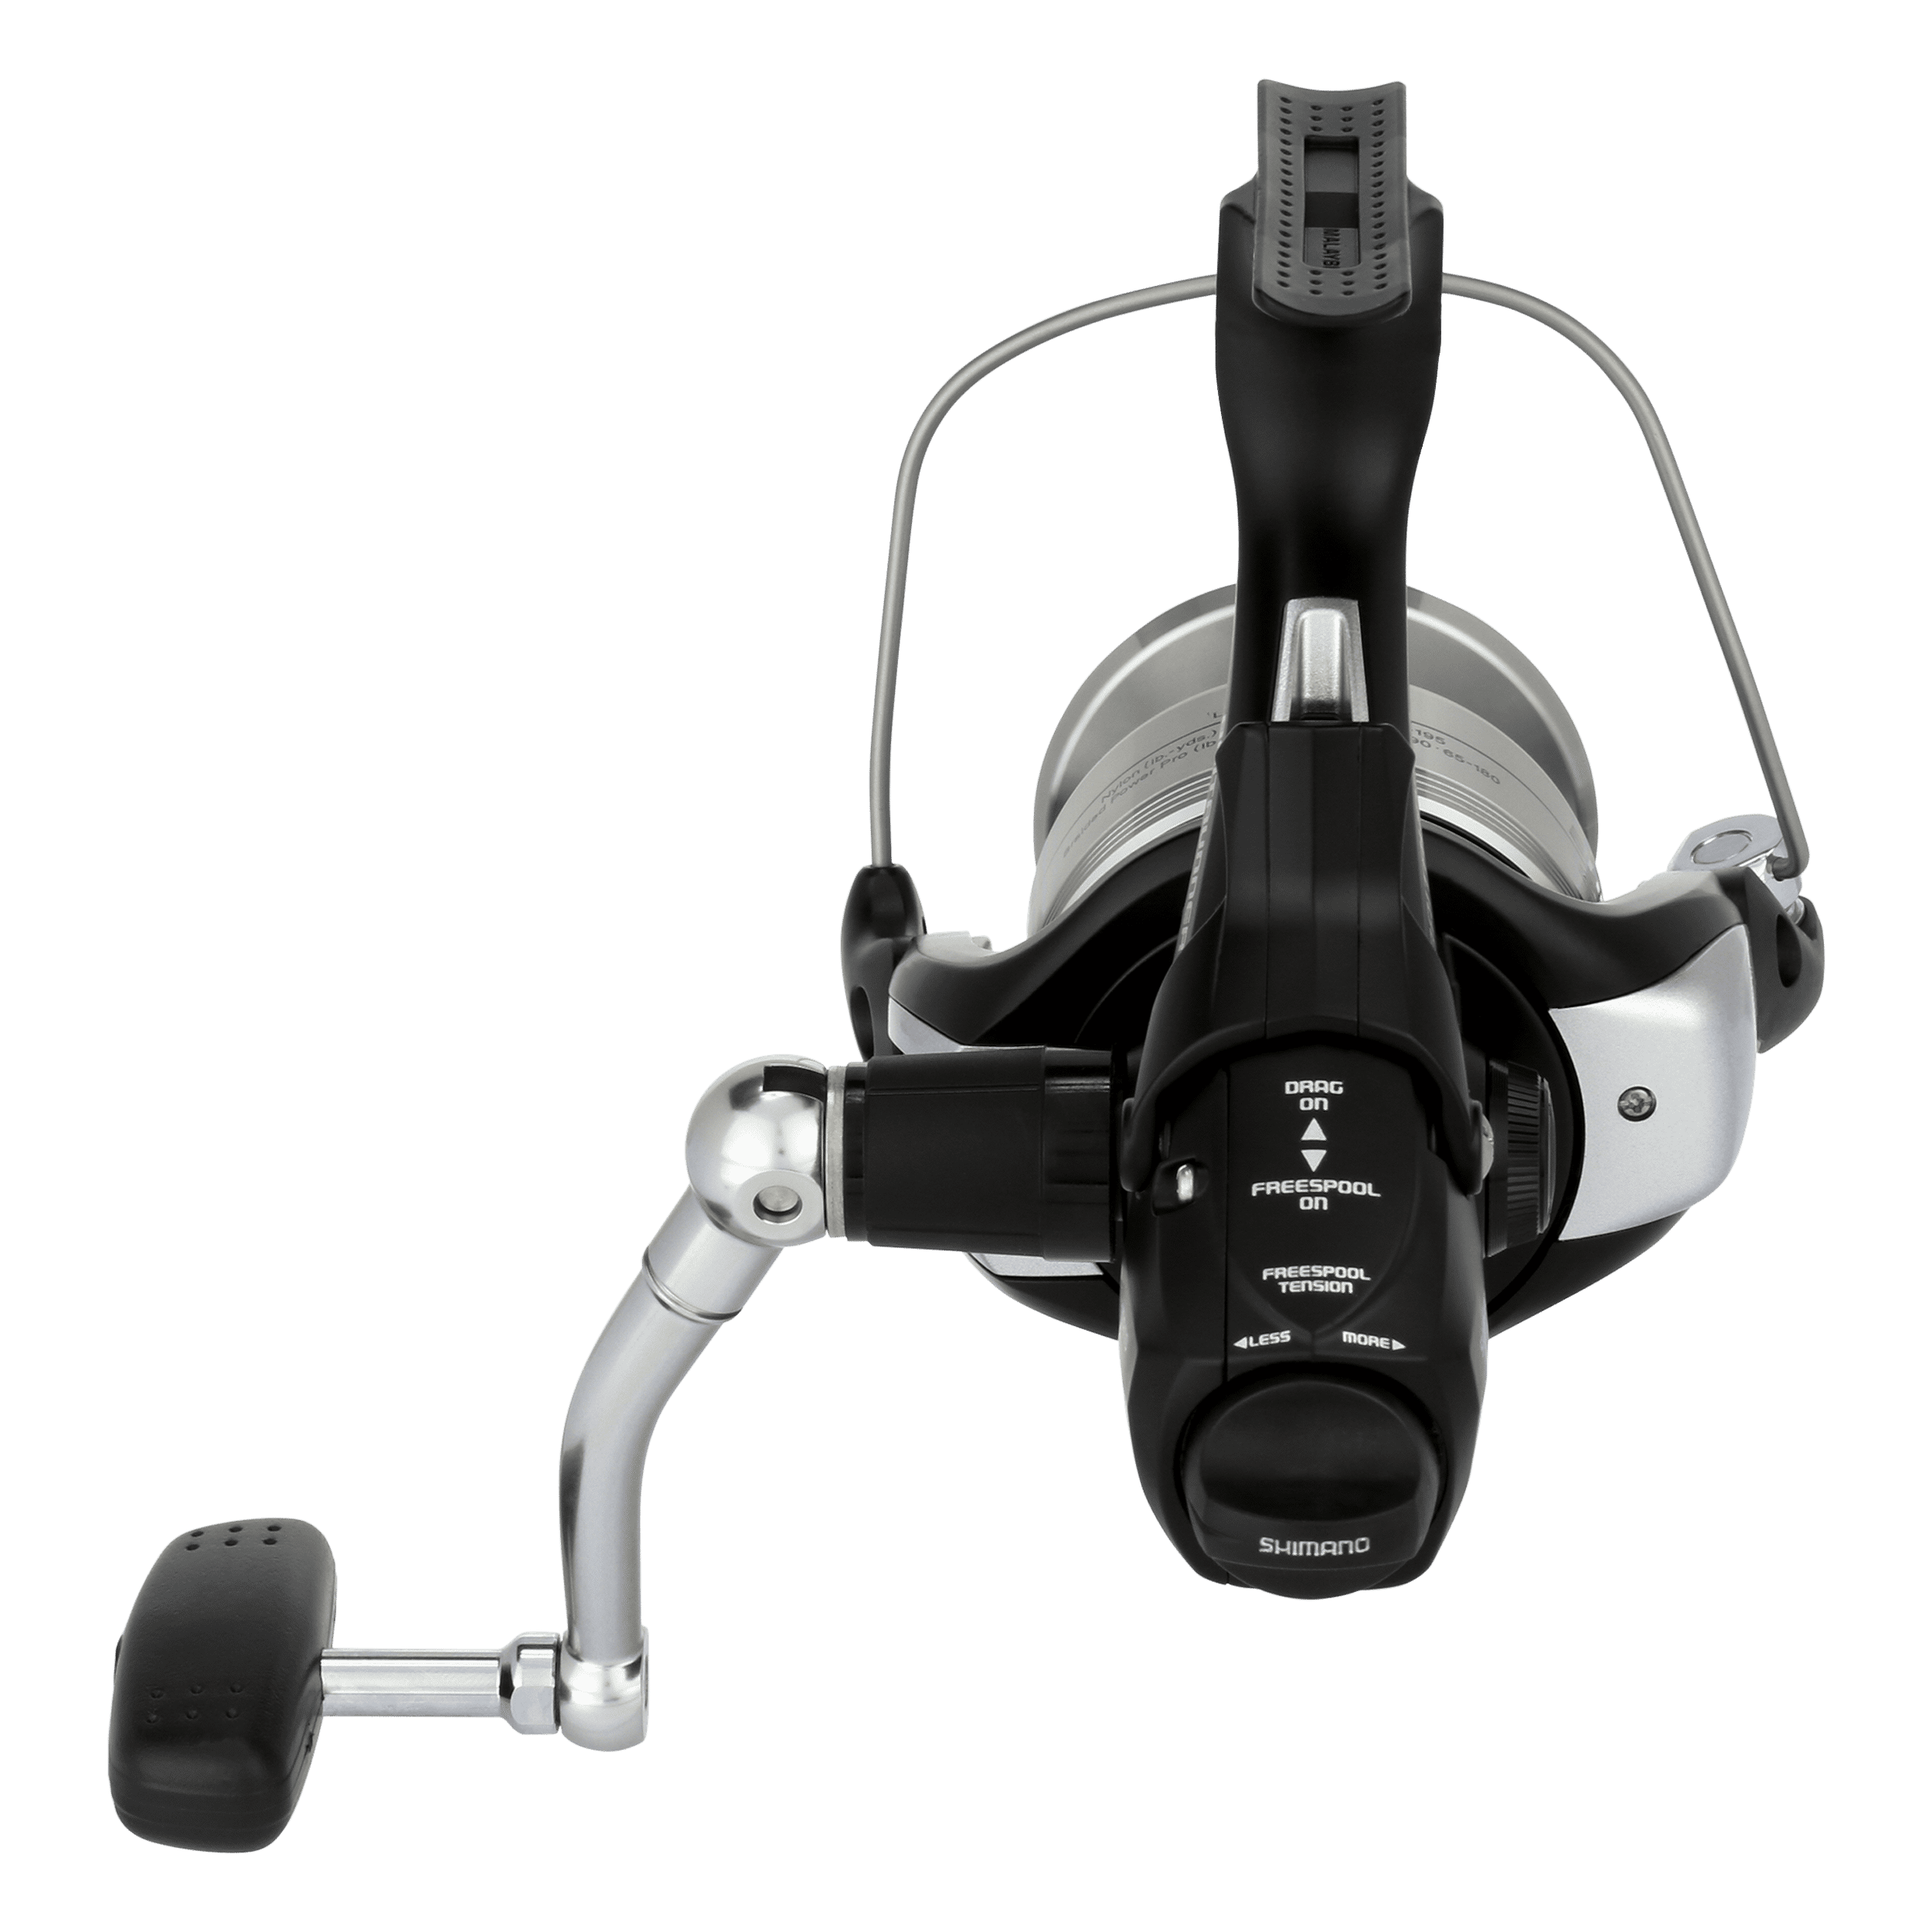 Prox Top Pit Ento 4 6000MK Surf Spinning reel From Stylish anglers